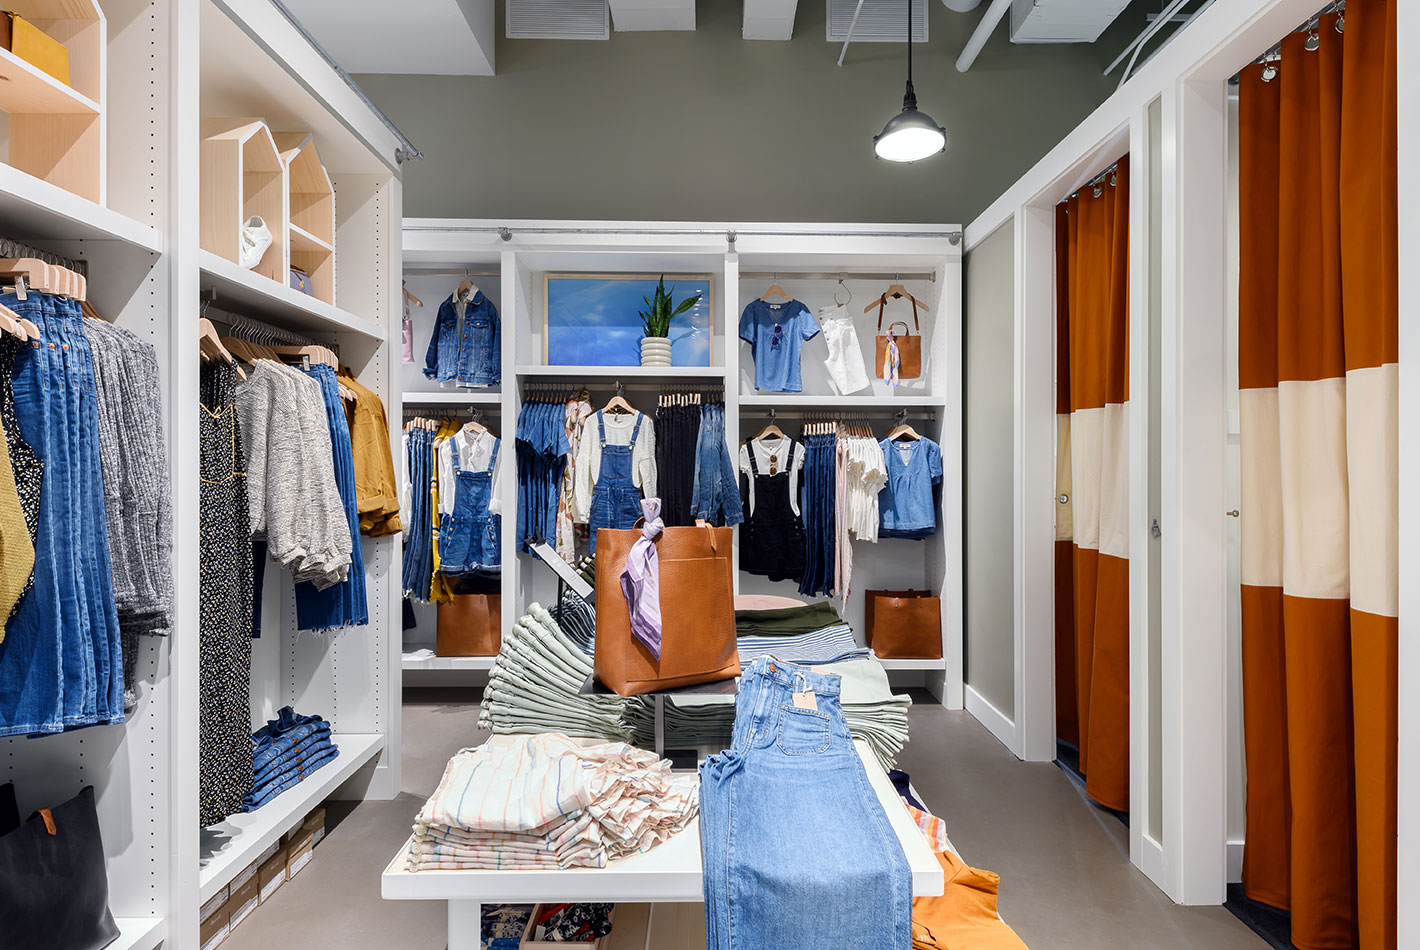 The women's department at Madewell features a collection of indigo-hued clothing and accessories. Dressing rooms nearby are covered in canvas panels.